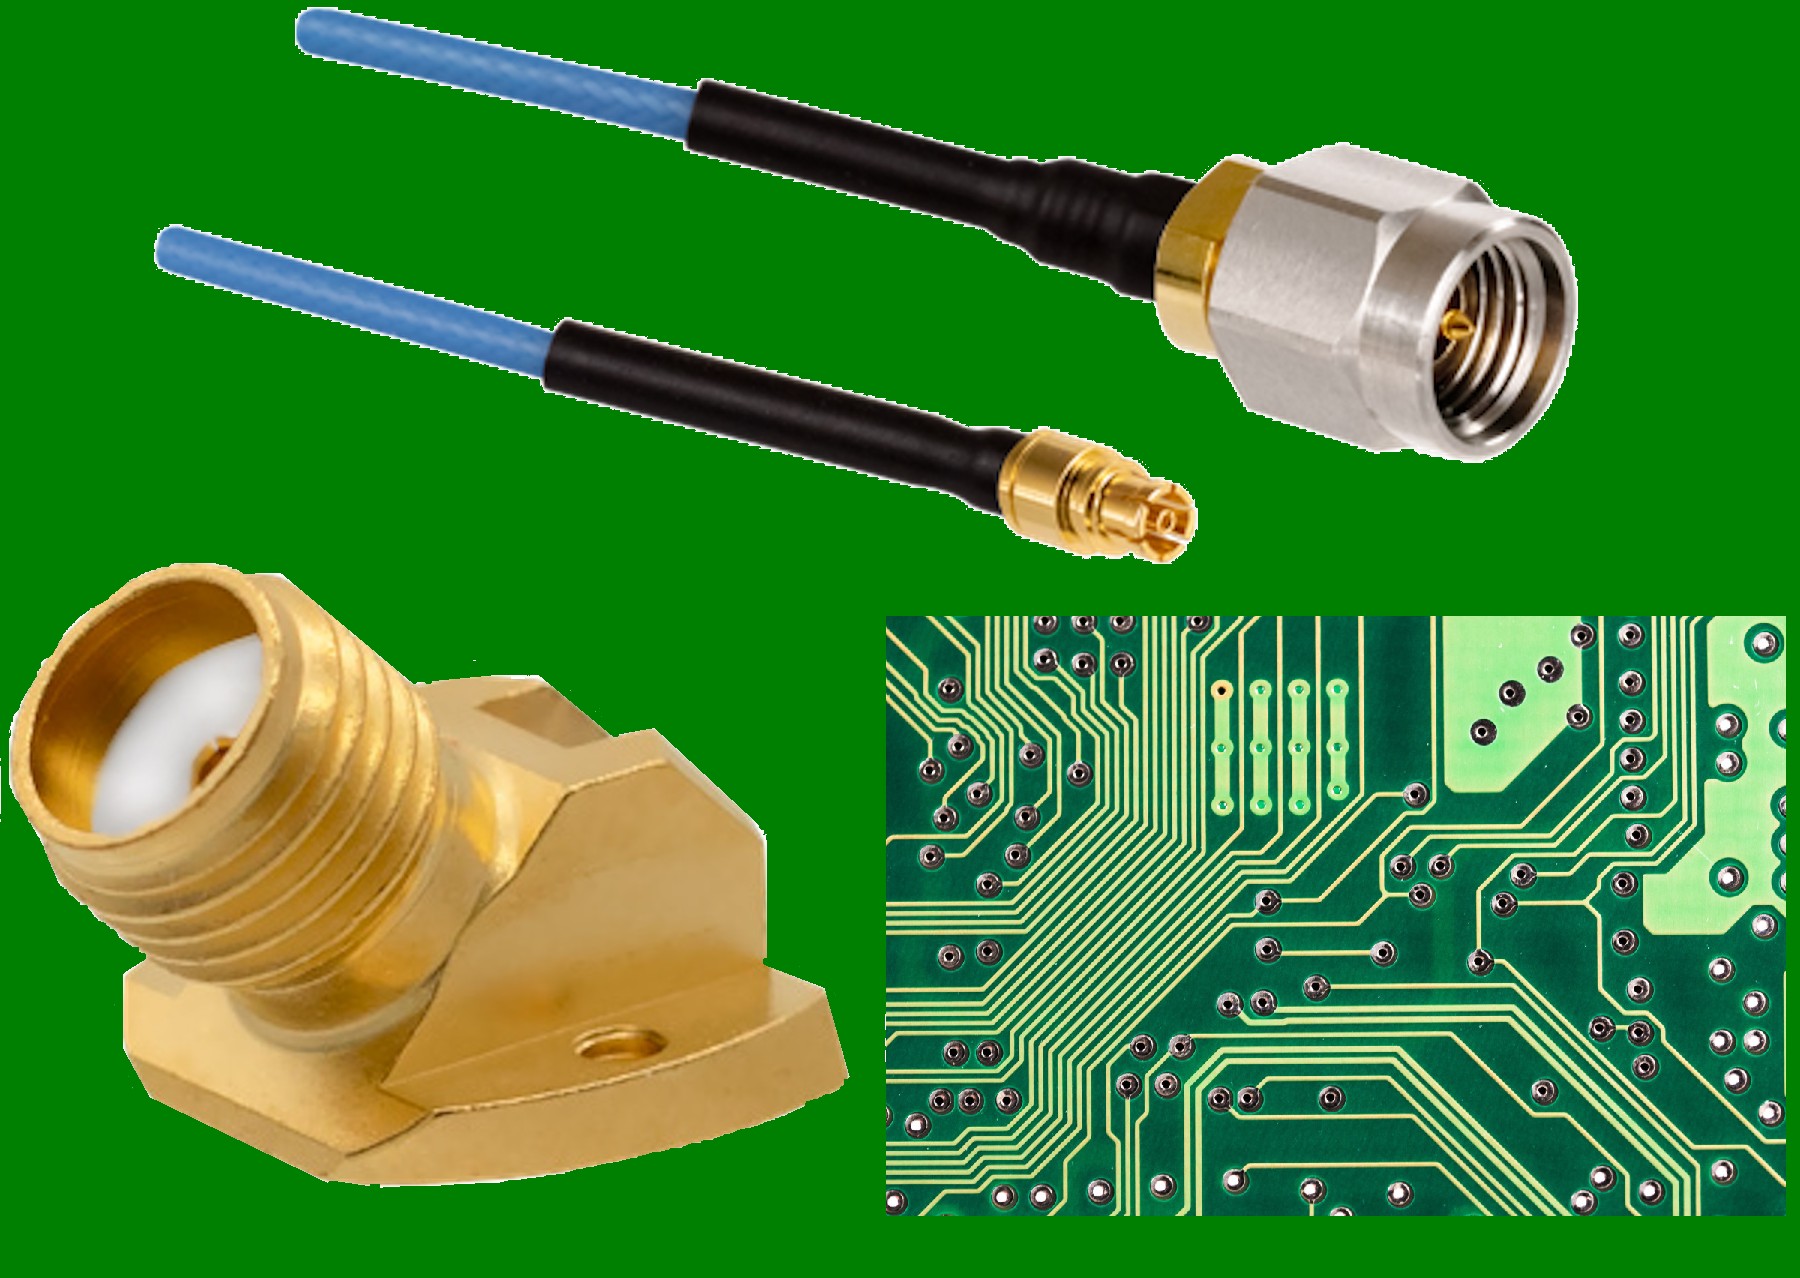 How mmWaves affect cables, connectors, and PCB traces